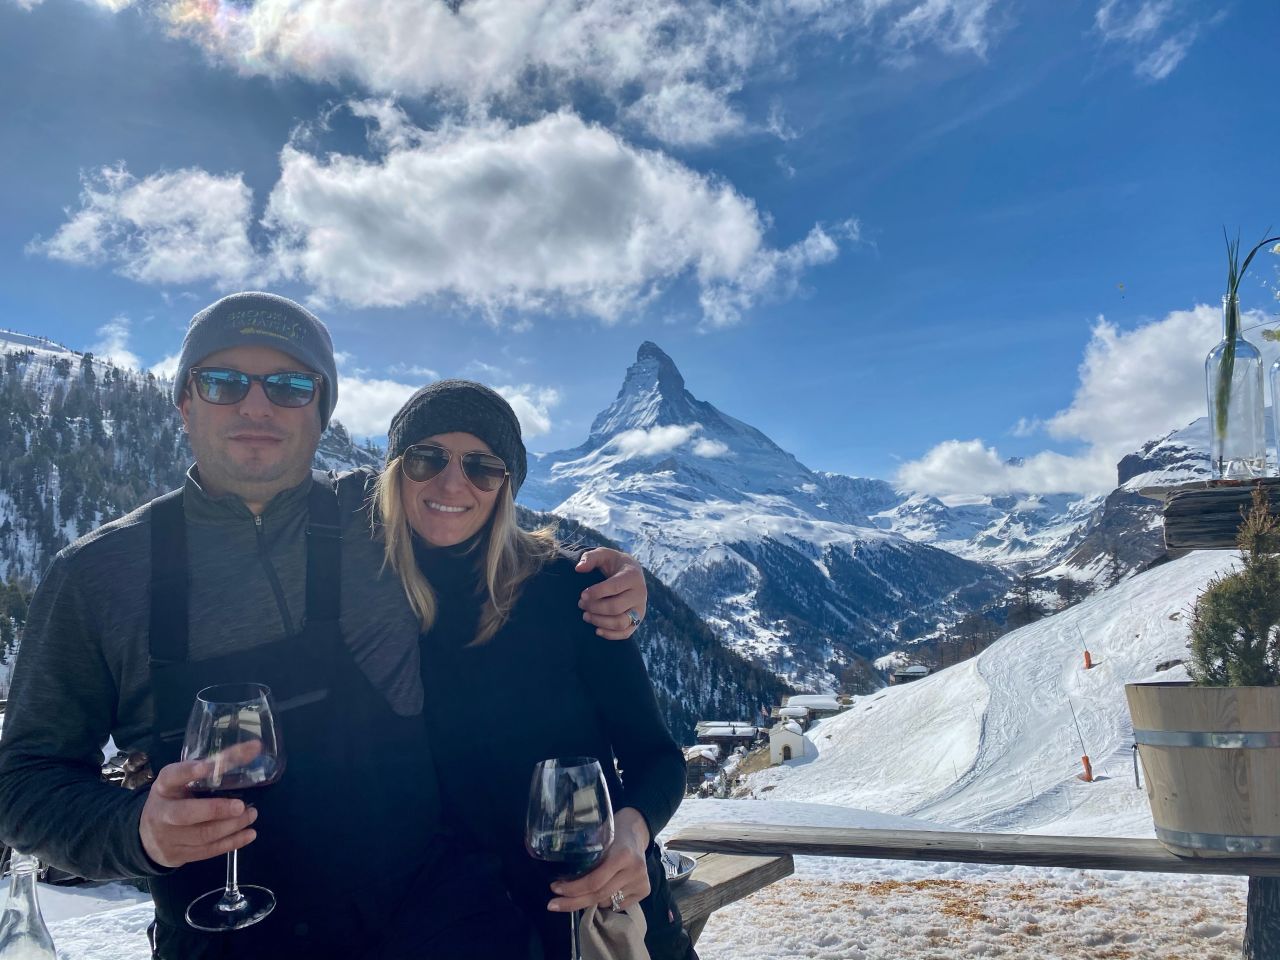 The writer and her husband in Zermatt, Switzerland, last year before they rushed back to the US amid the raging pandemic.